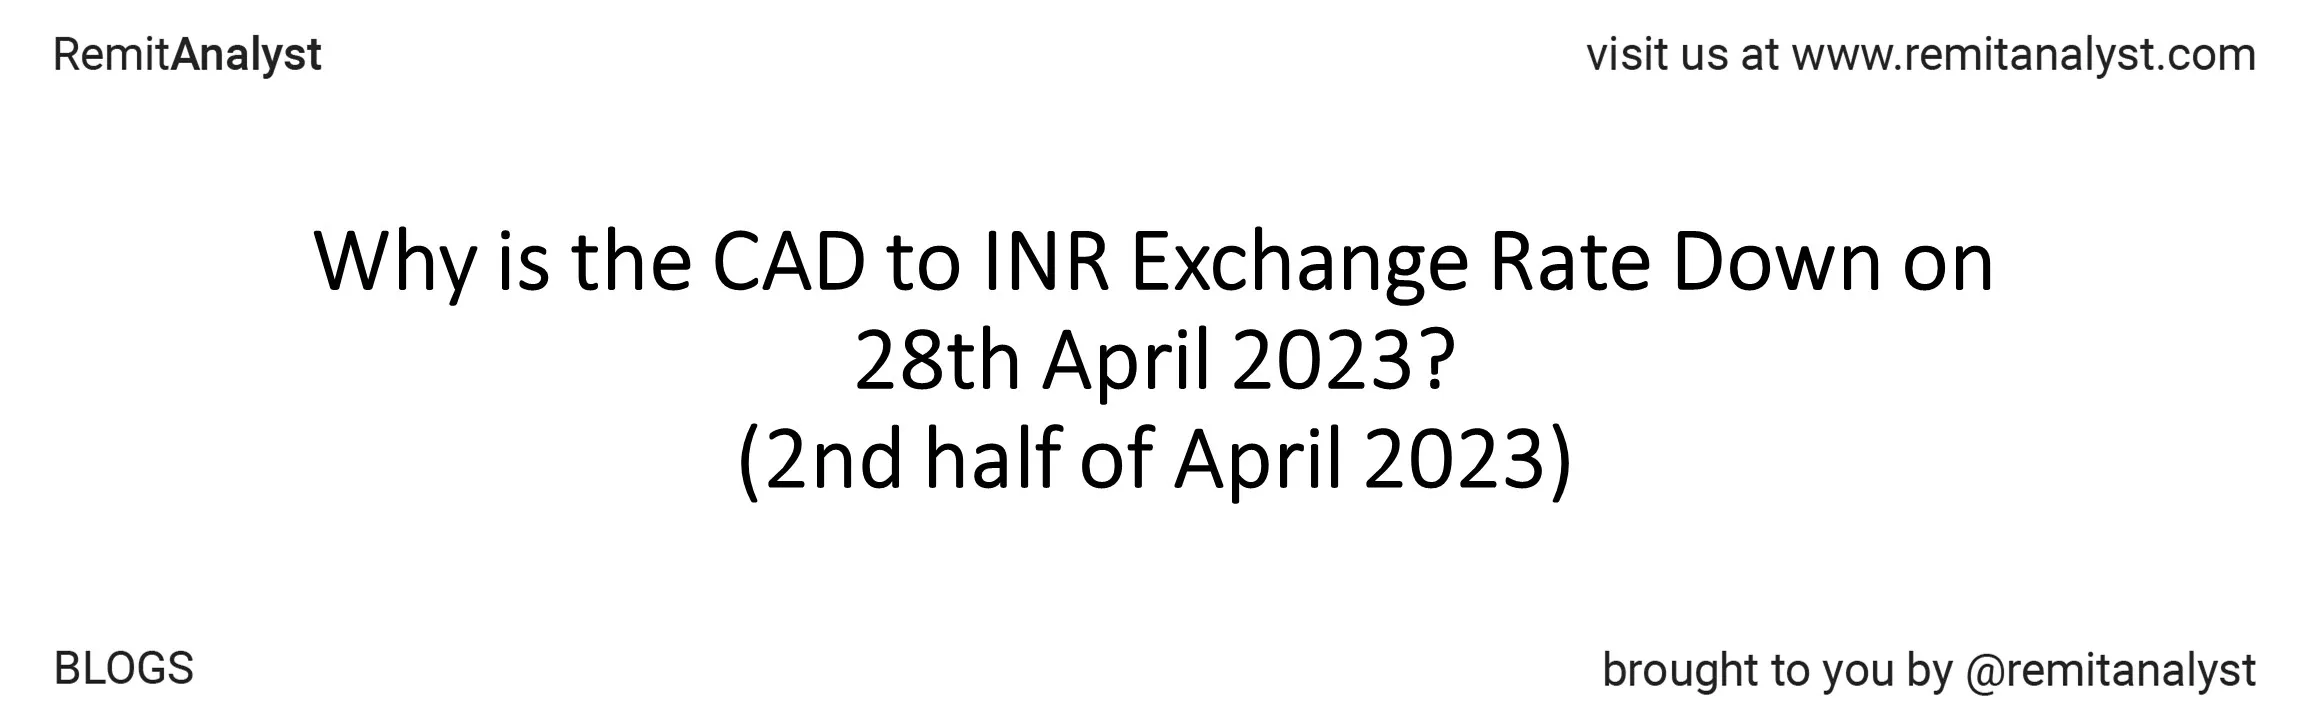 cad-to-inr-exchange-rate-from-17-apr-2023-to-28-apr-2023-title